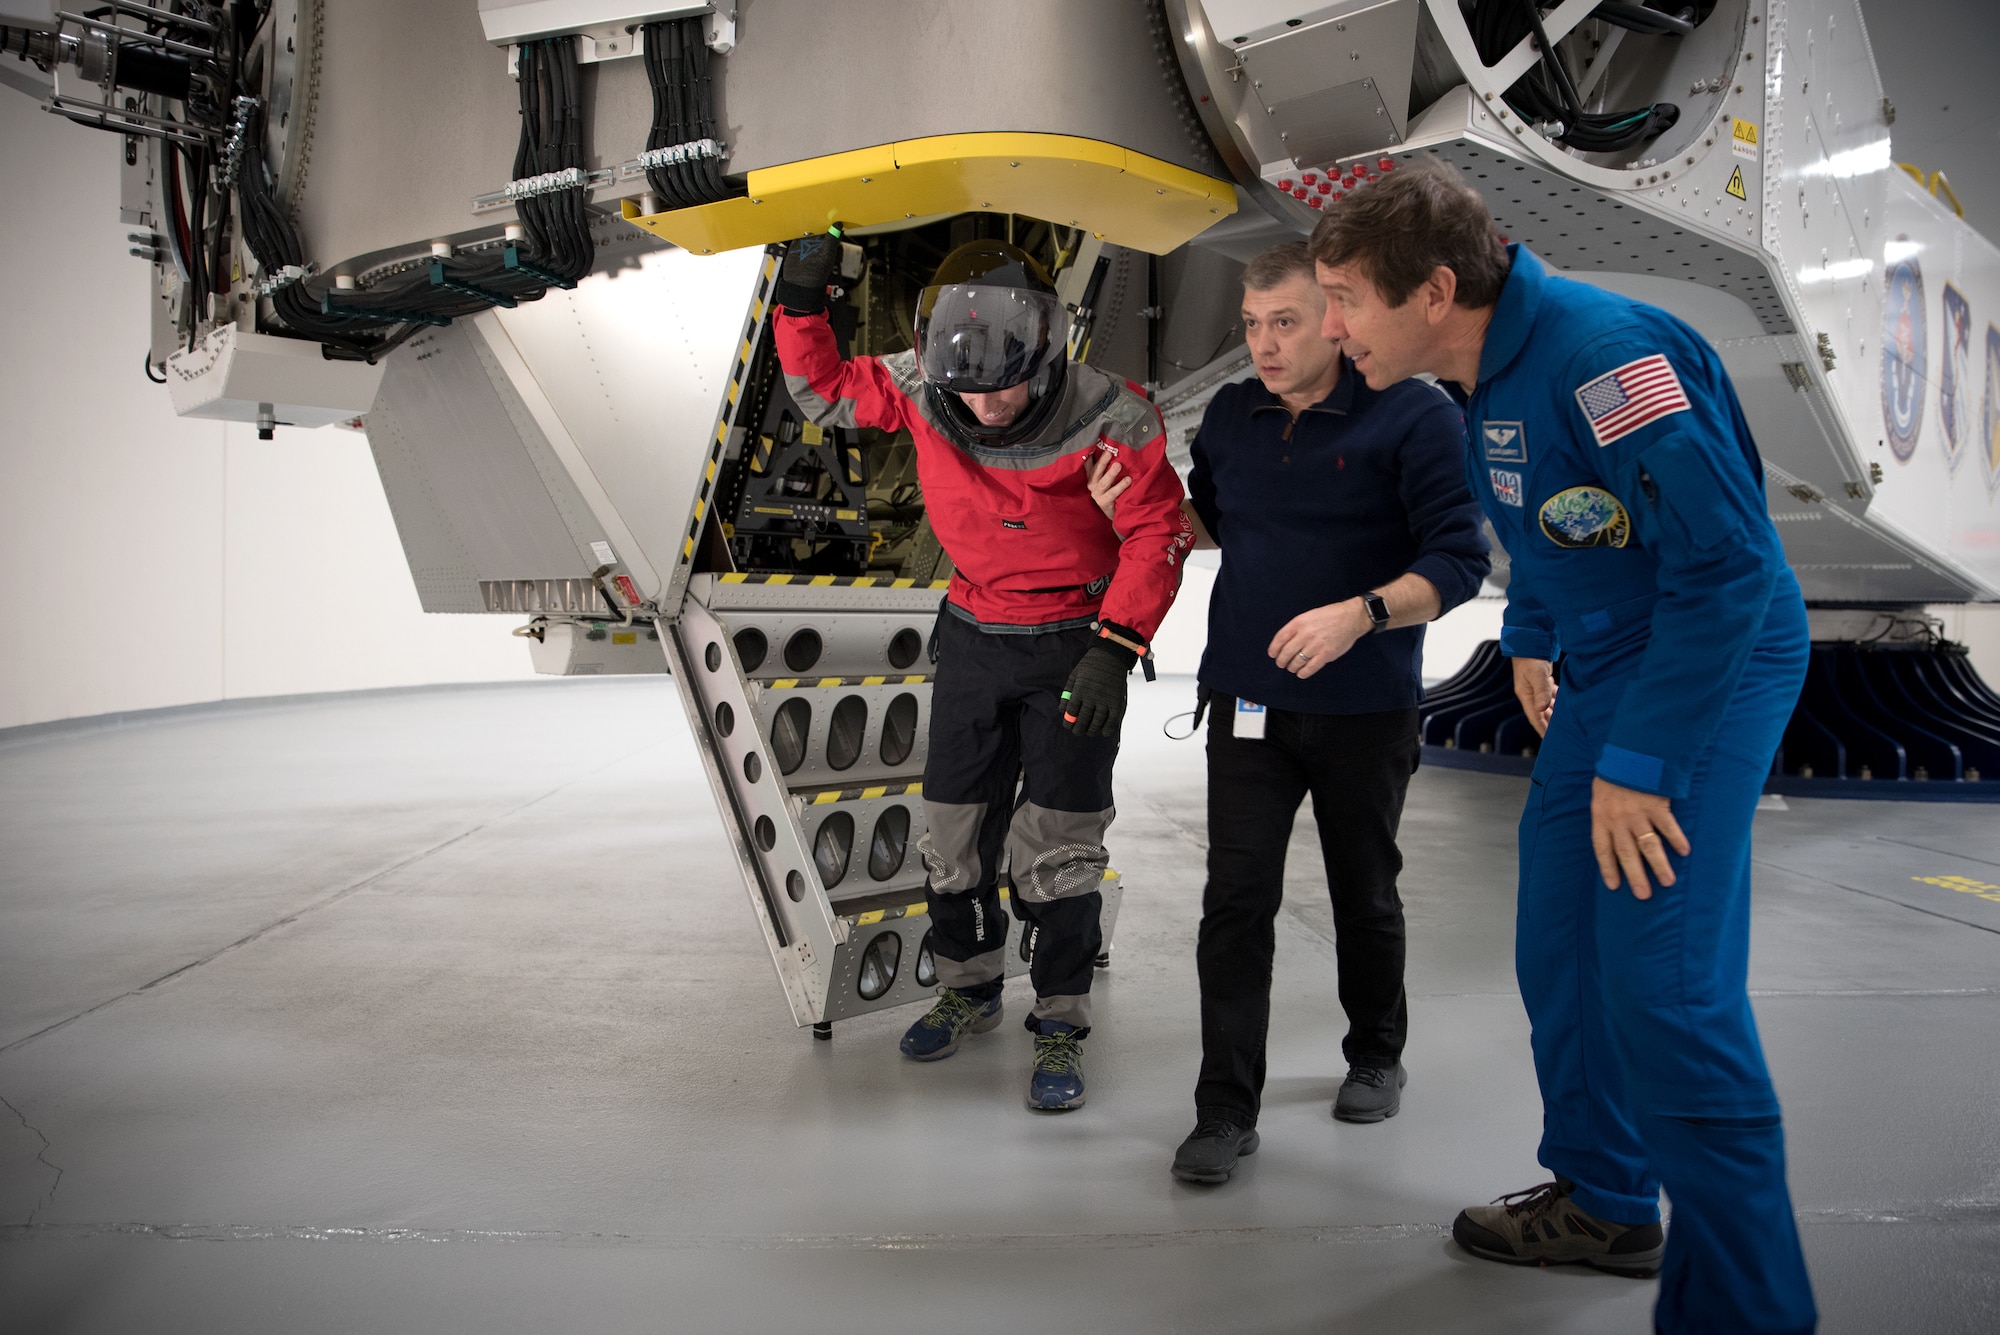 NASA spacesuit engineer Ian Meginnis is helped down from the centrifuge by KBRwyle contractor Brent Ochs with the Air Force Research Laboratory and NASA astronaut and physician Dr. Michael Barratt following his spin during centrifuge testing Nov. 1 and 2.